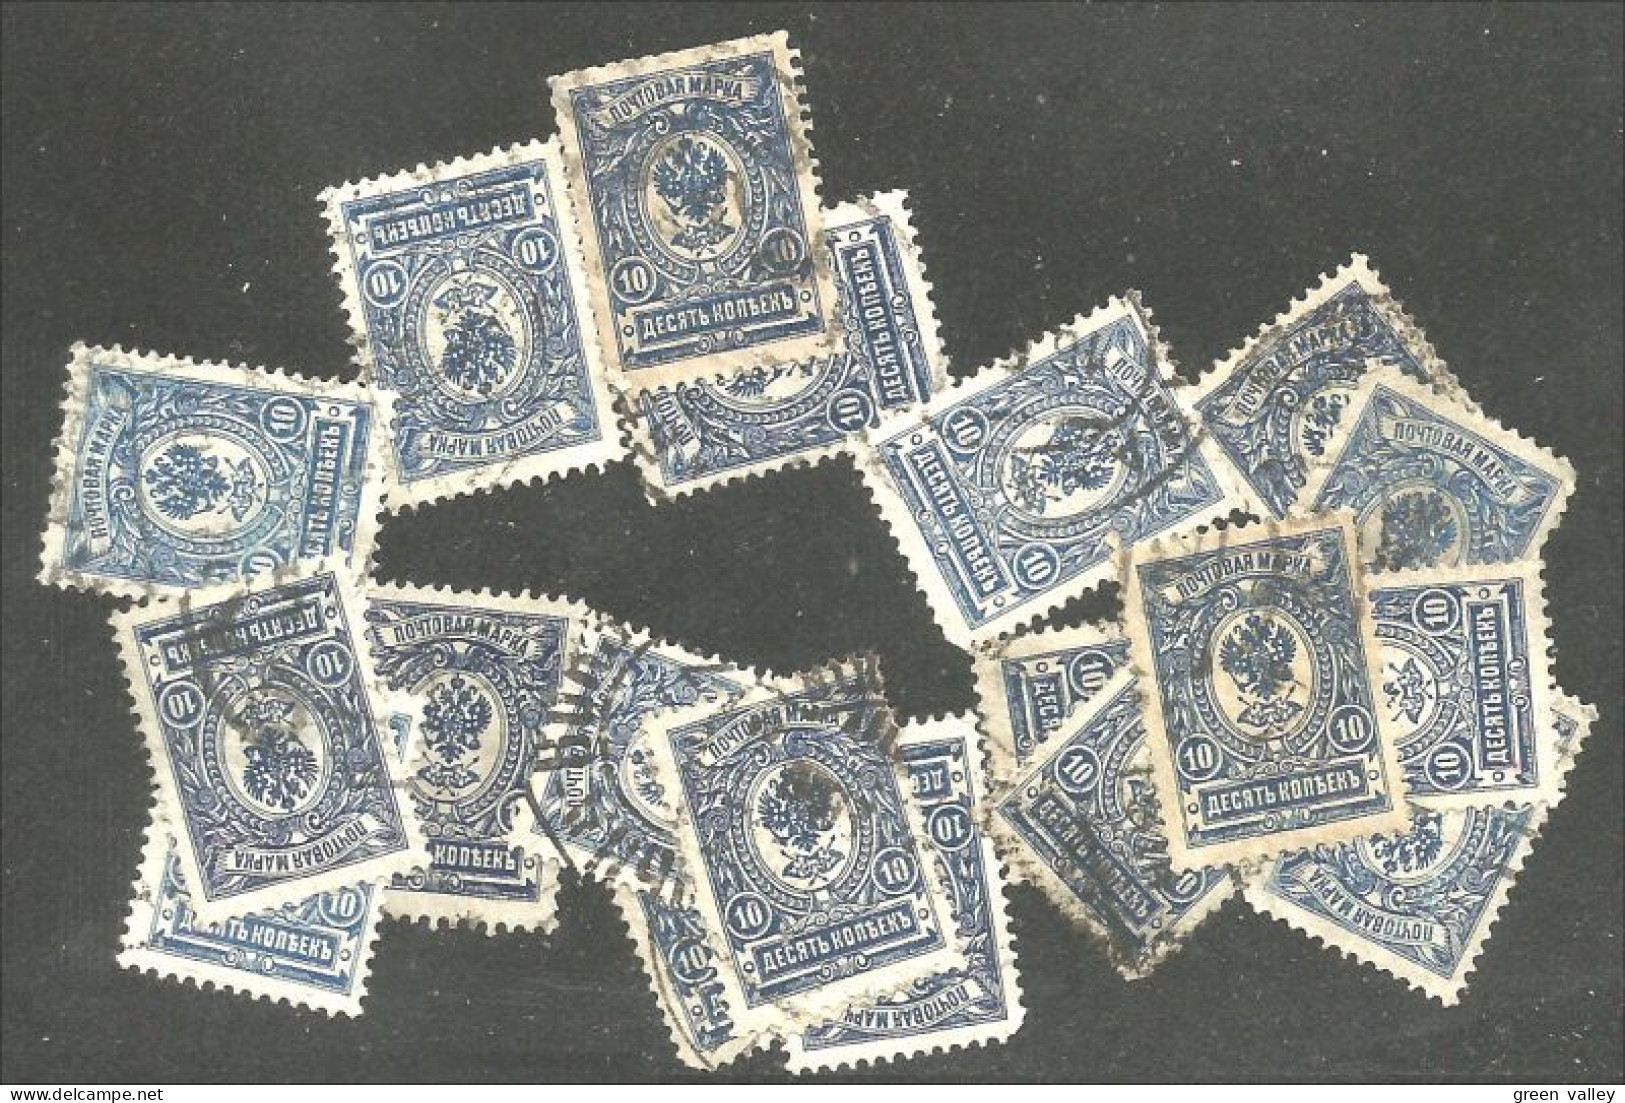 771 Russie 10k Blue Bleu 1909 19 Stamps For Study Aigle Imperial Eagle Post Horn Cor Postal Varnish (RUZ-361) - Used Stamps